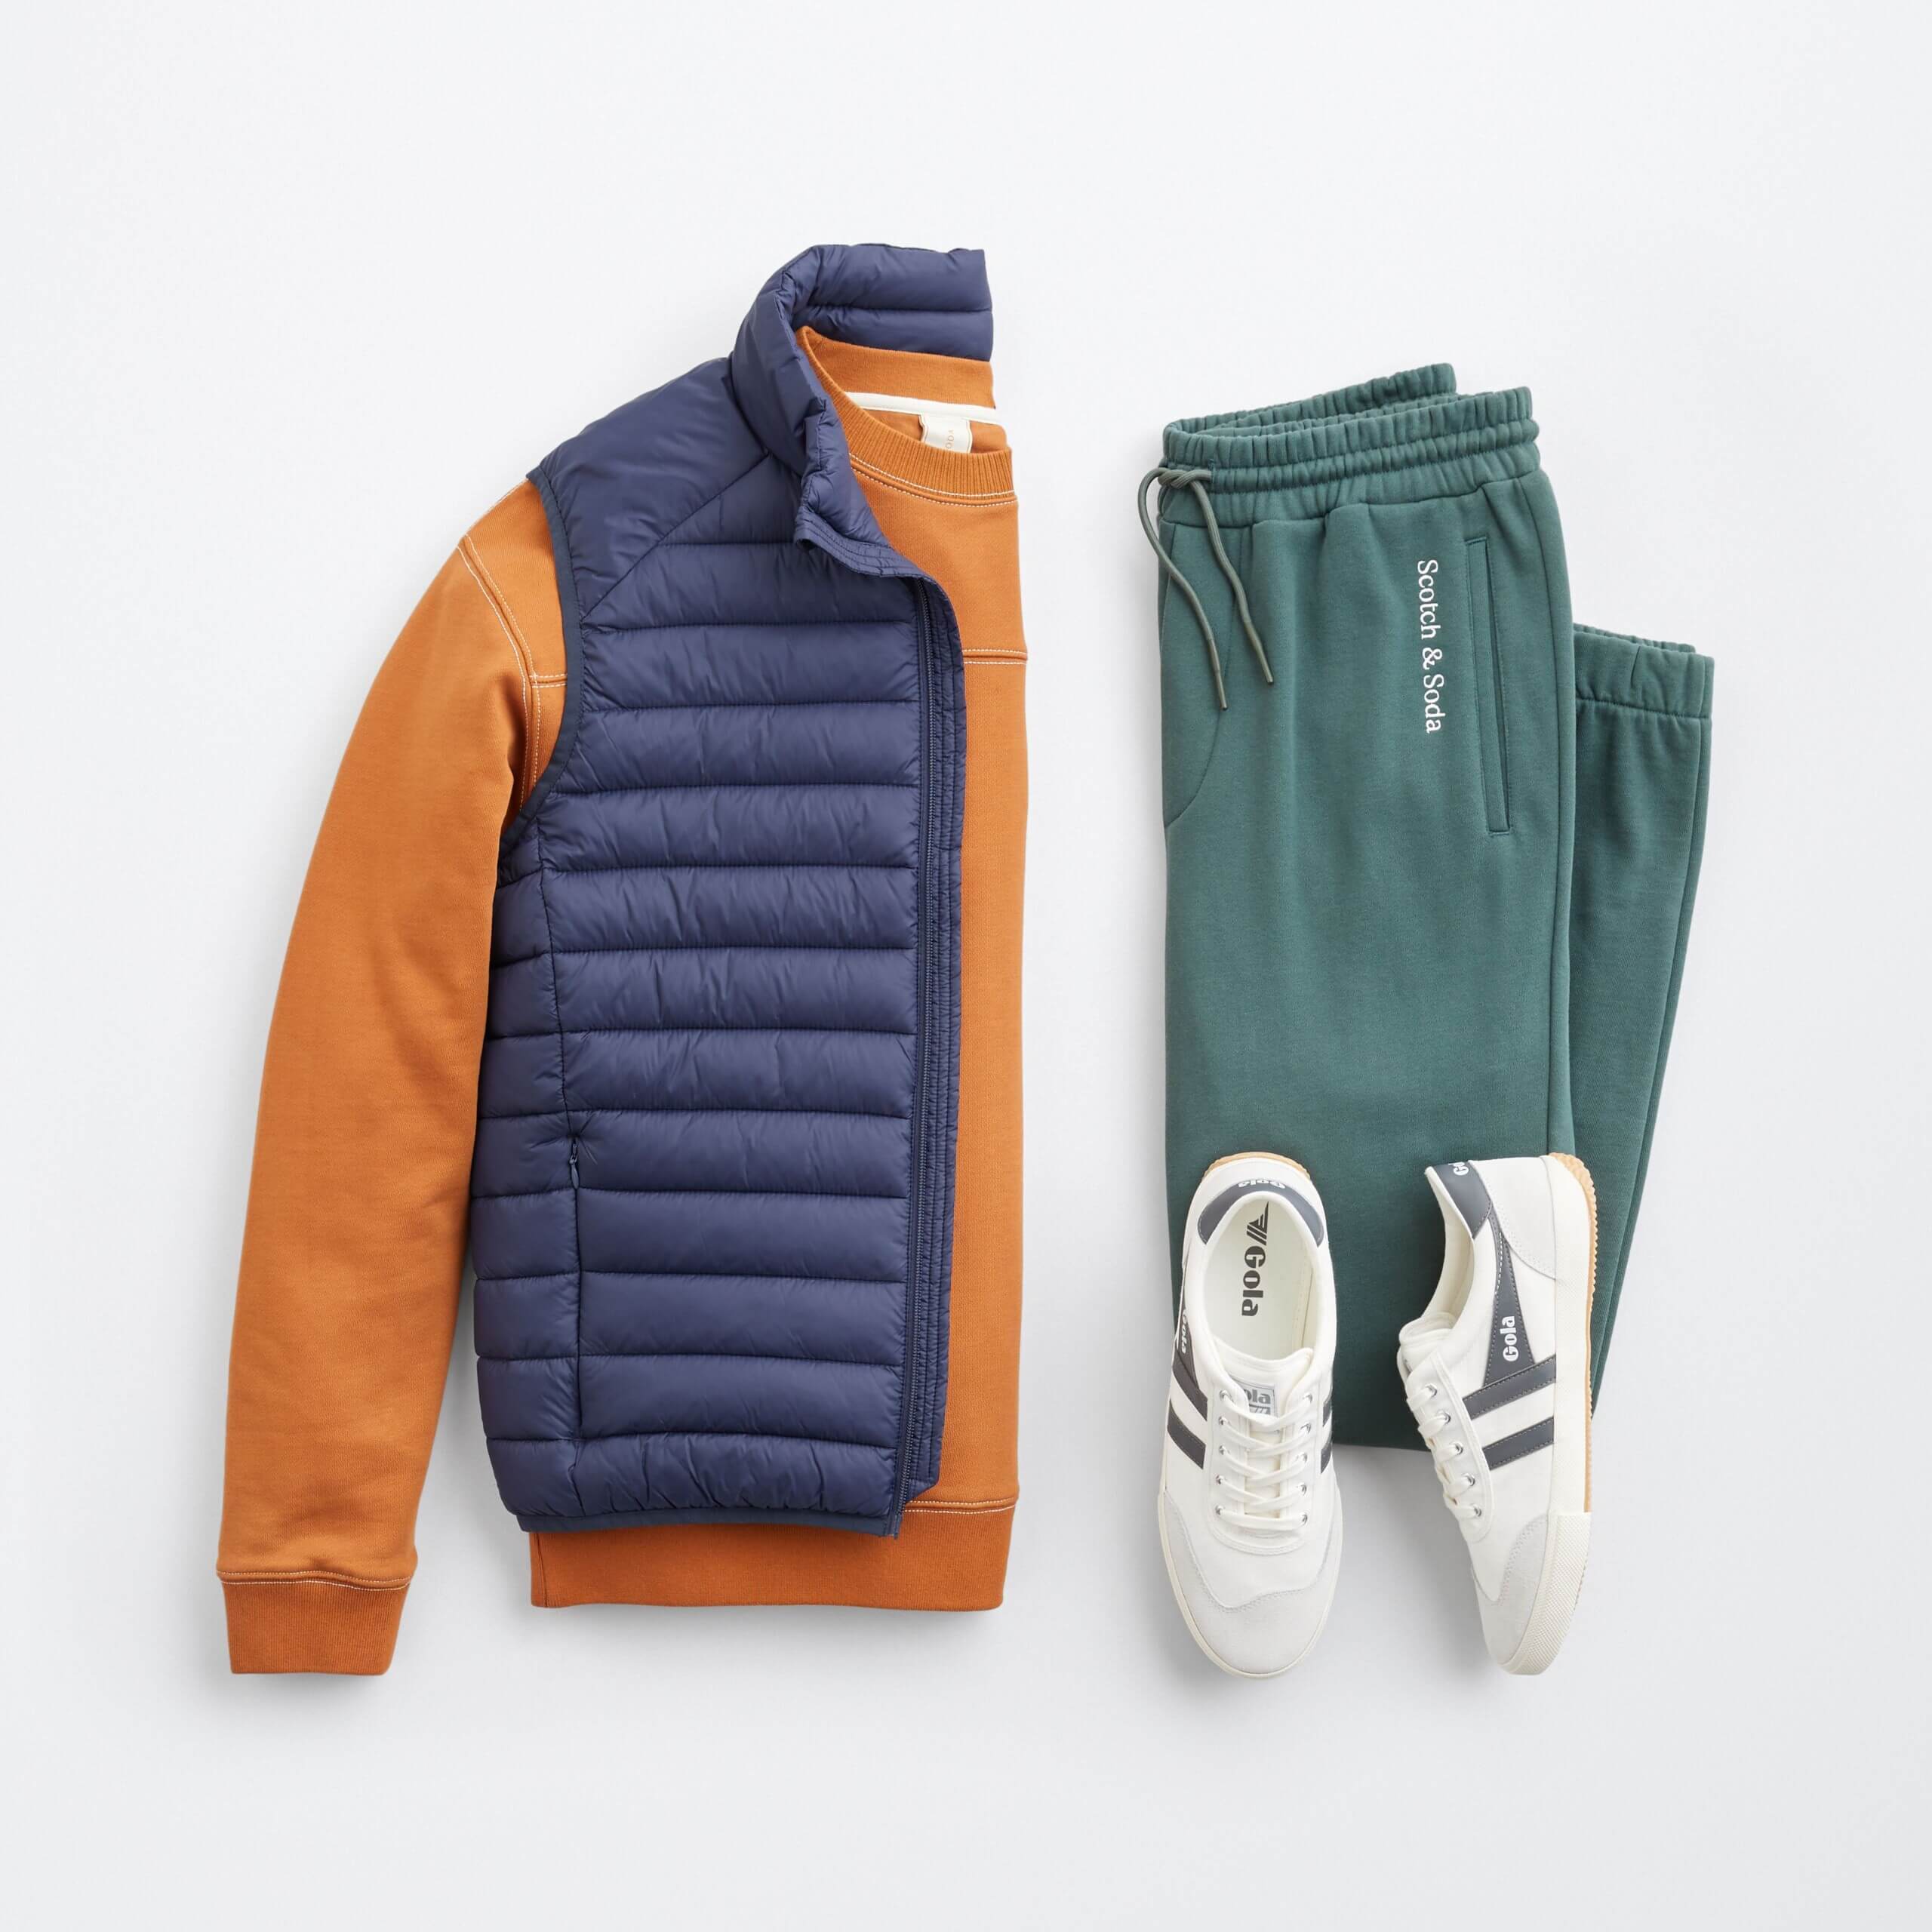 Stitch Fix men's outfit laydown featuring navy puffer vest over orange pullover, green joggers and white sneakers. 